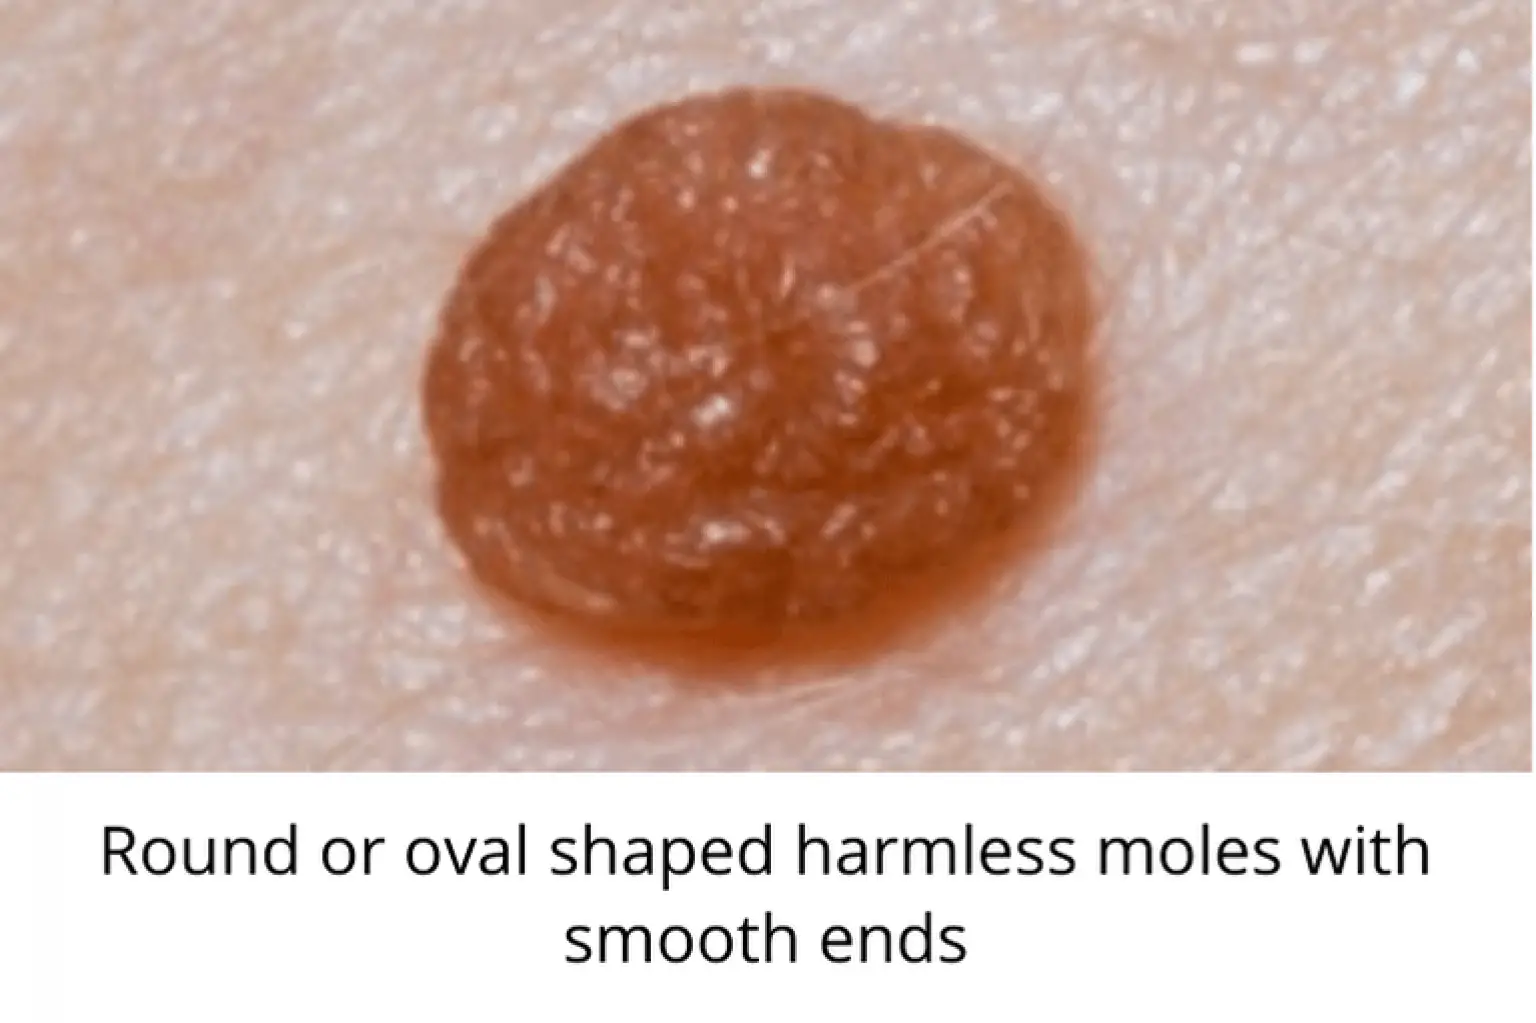 Skin Moles To Worry About A Complete Guide With Skin Moles Pictures